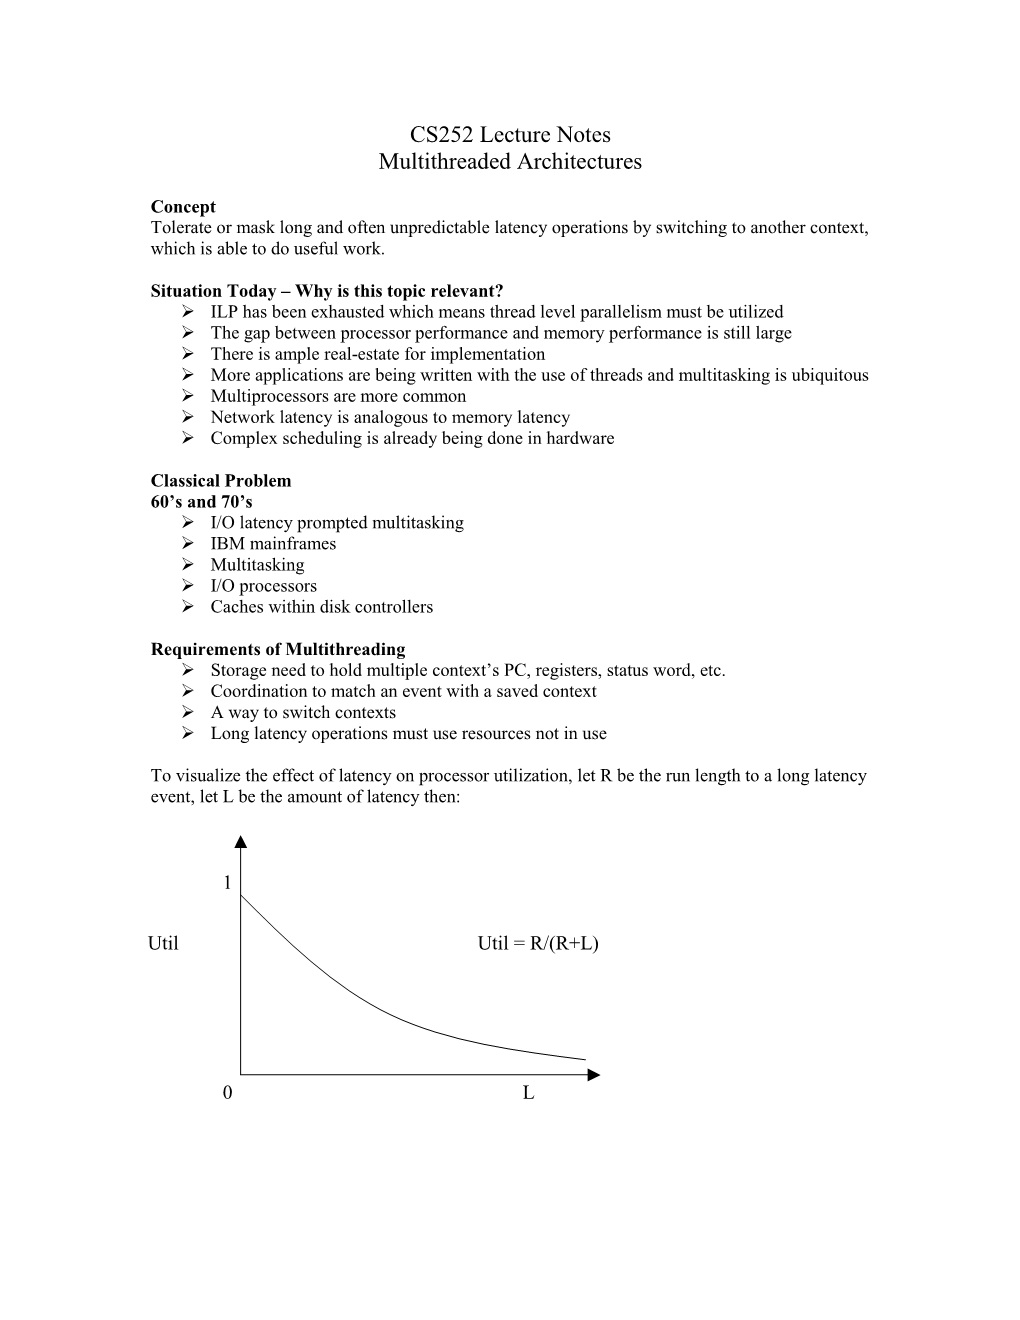 CS252 Lecture Notes Multithreaded Architectures